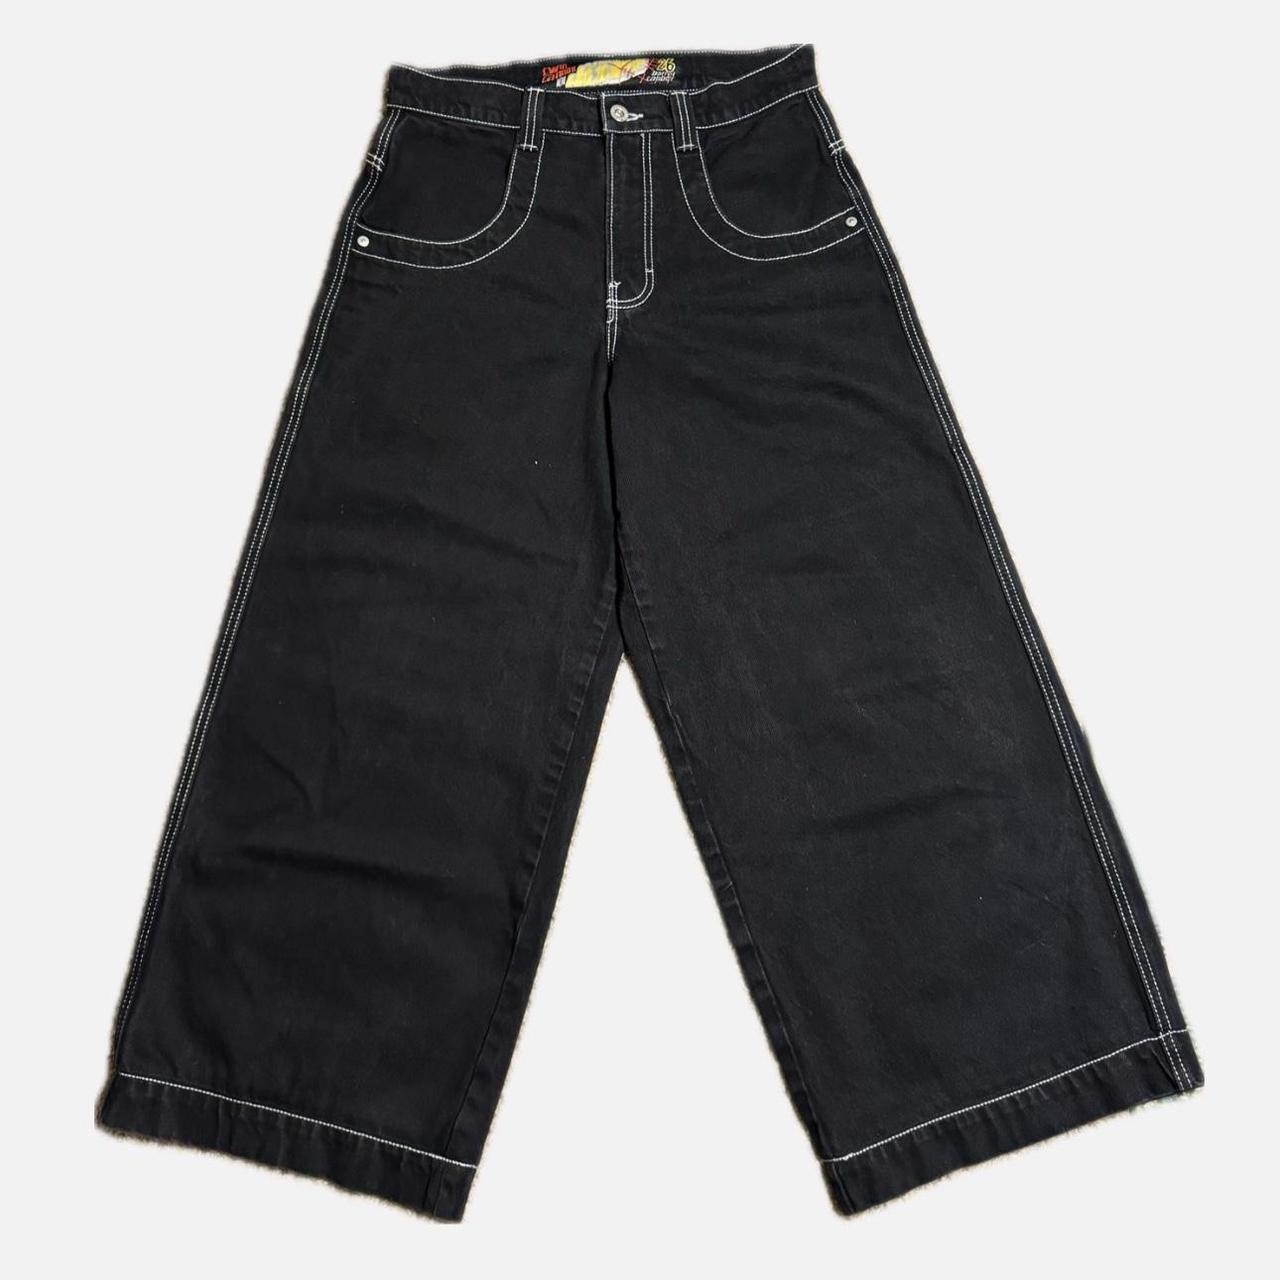 JNCO 101 Twin Cannon 26